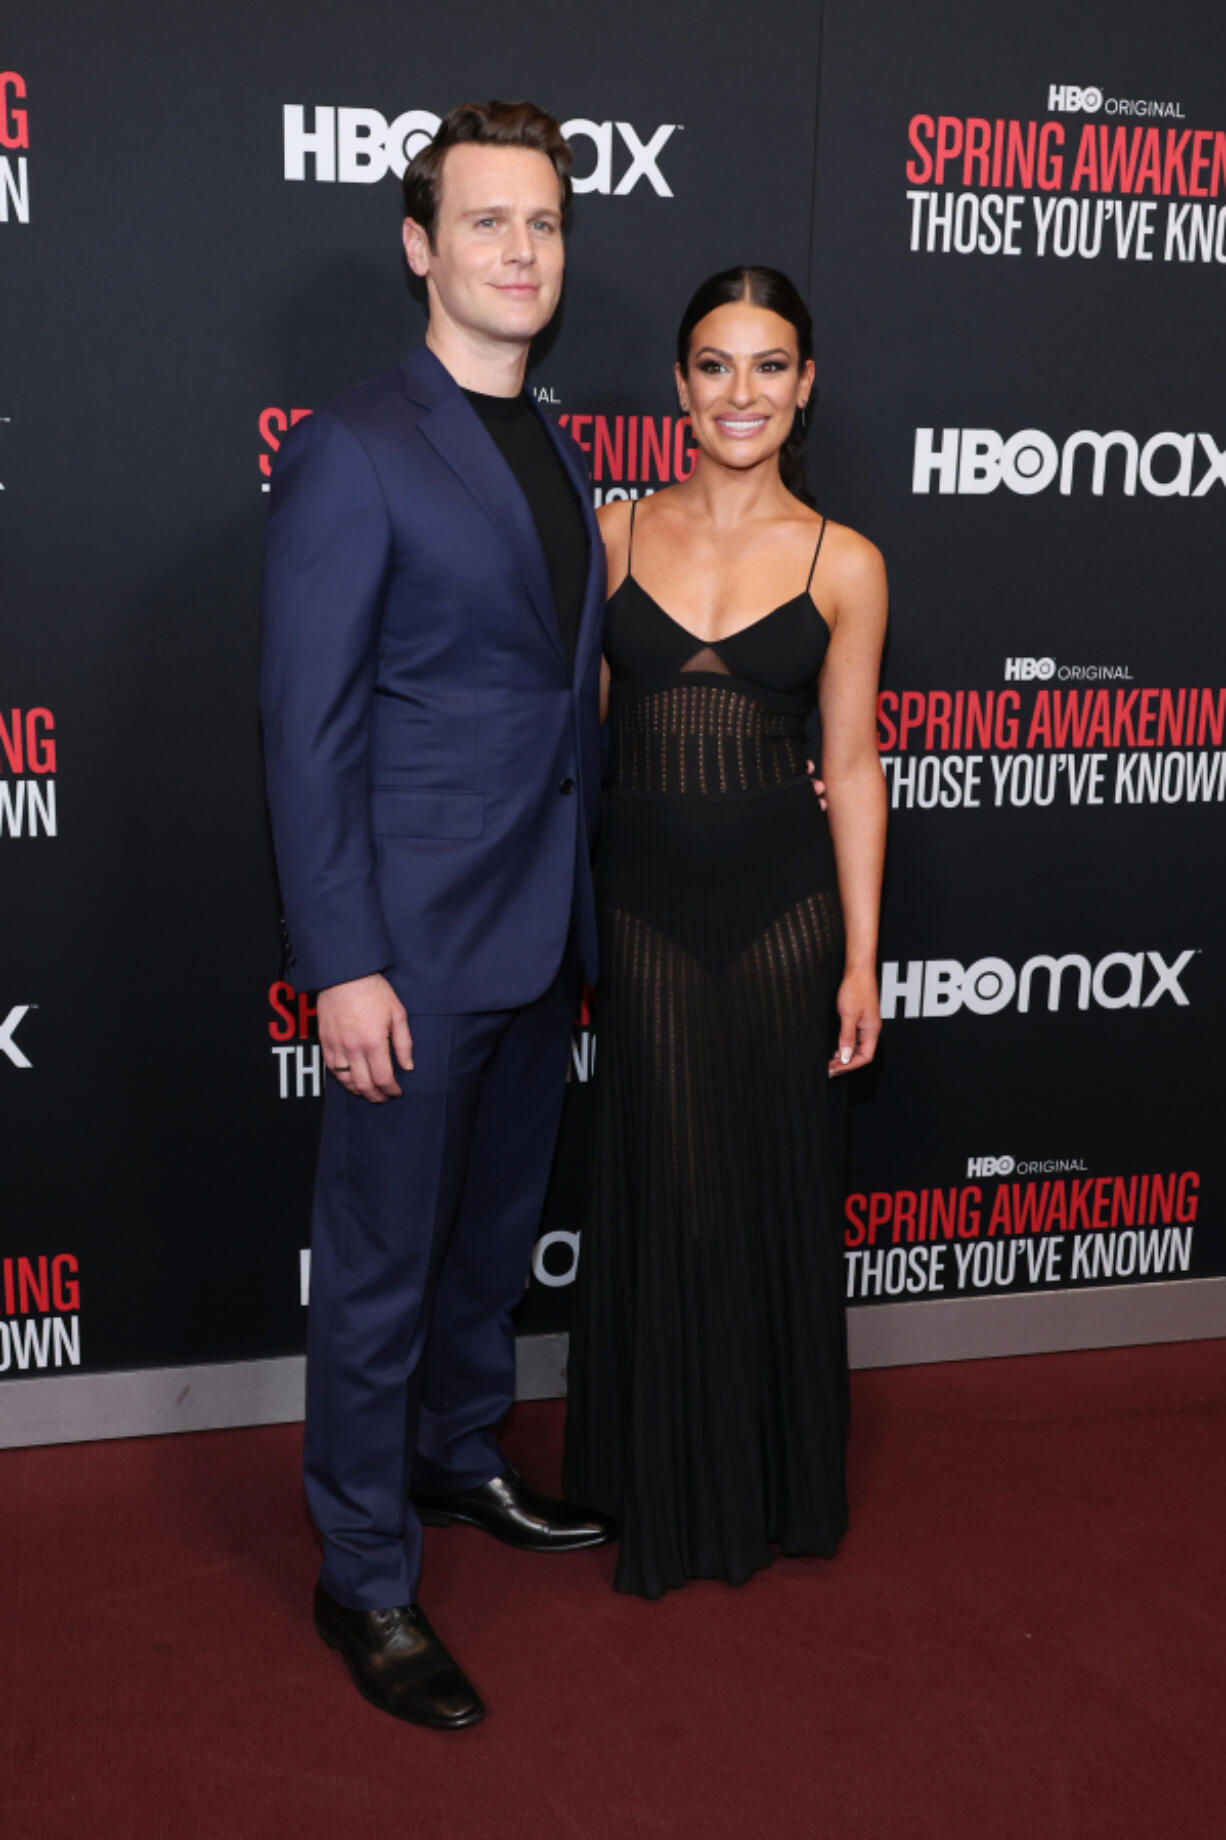 Jonathan Groff and Lea Michele attend the premiere of "Spring Awakening: Those You've Known" at Florence Gould Hall on April 25  in New York.